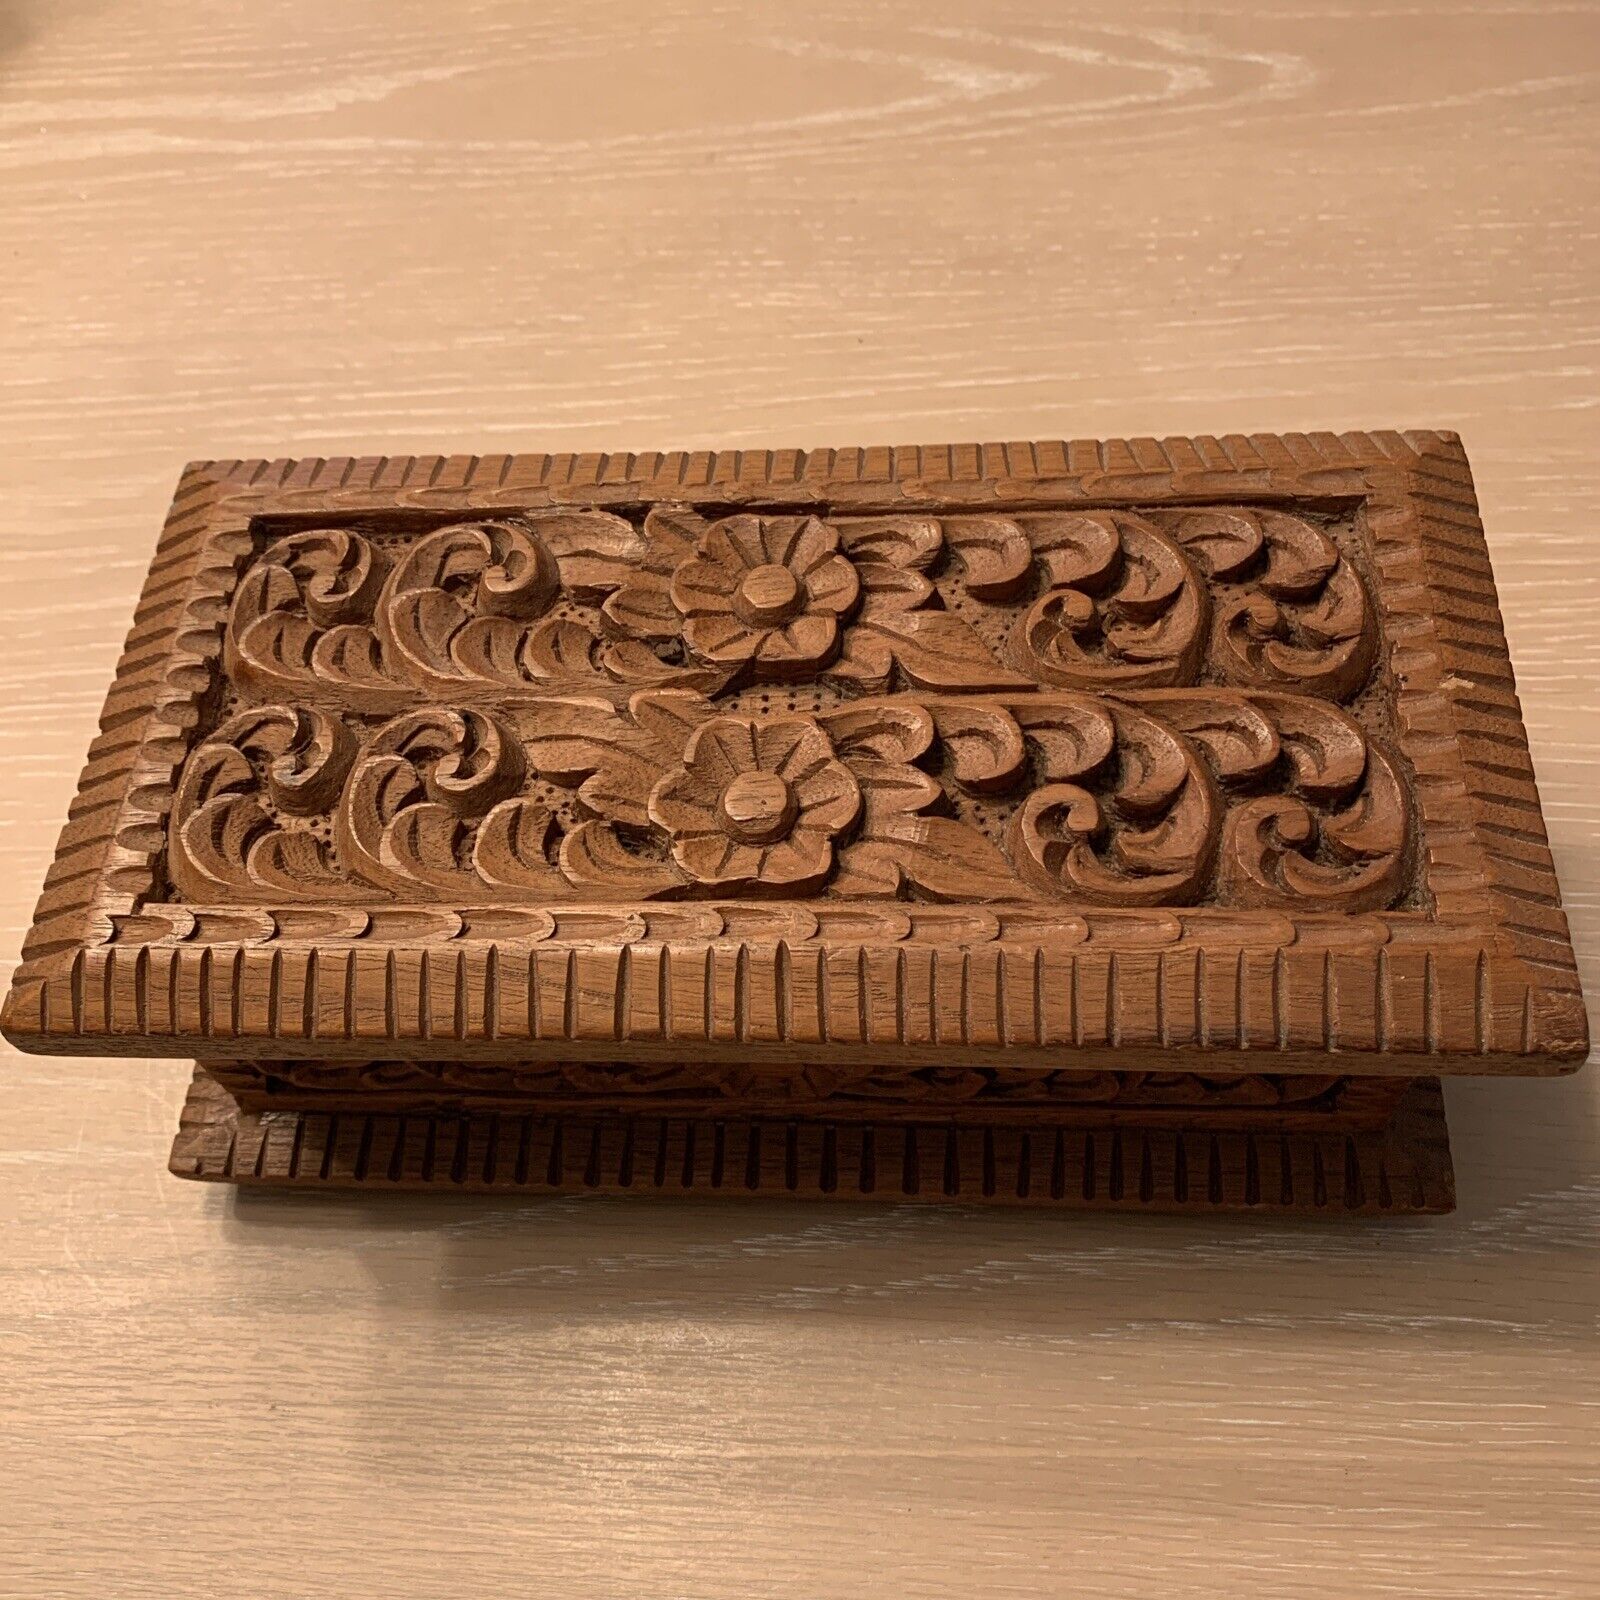 Intricate Hand Carved Wooden Jewelry Box - Beautiful Work 10 X 5 X 3.75 Inches